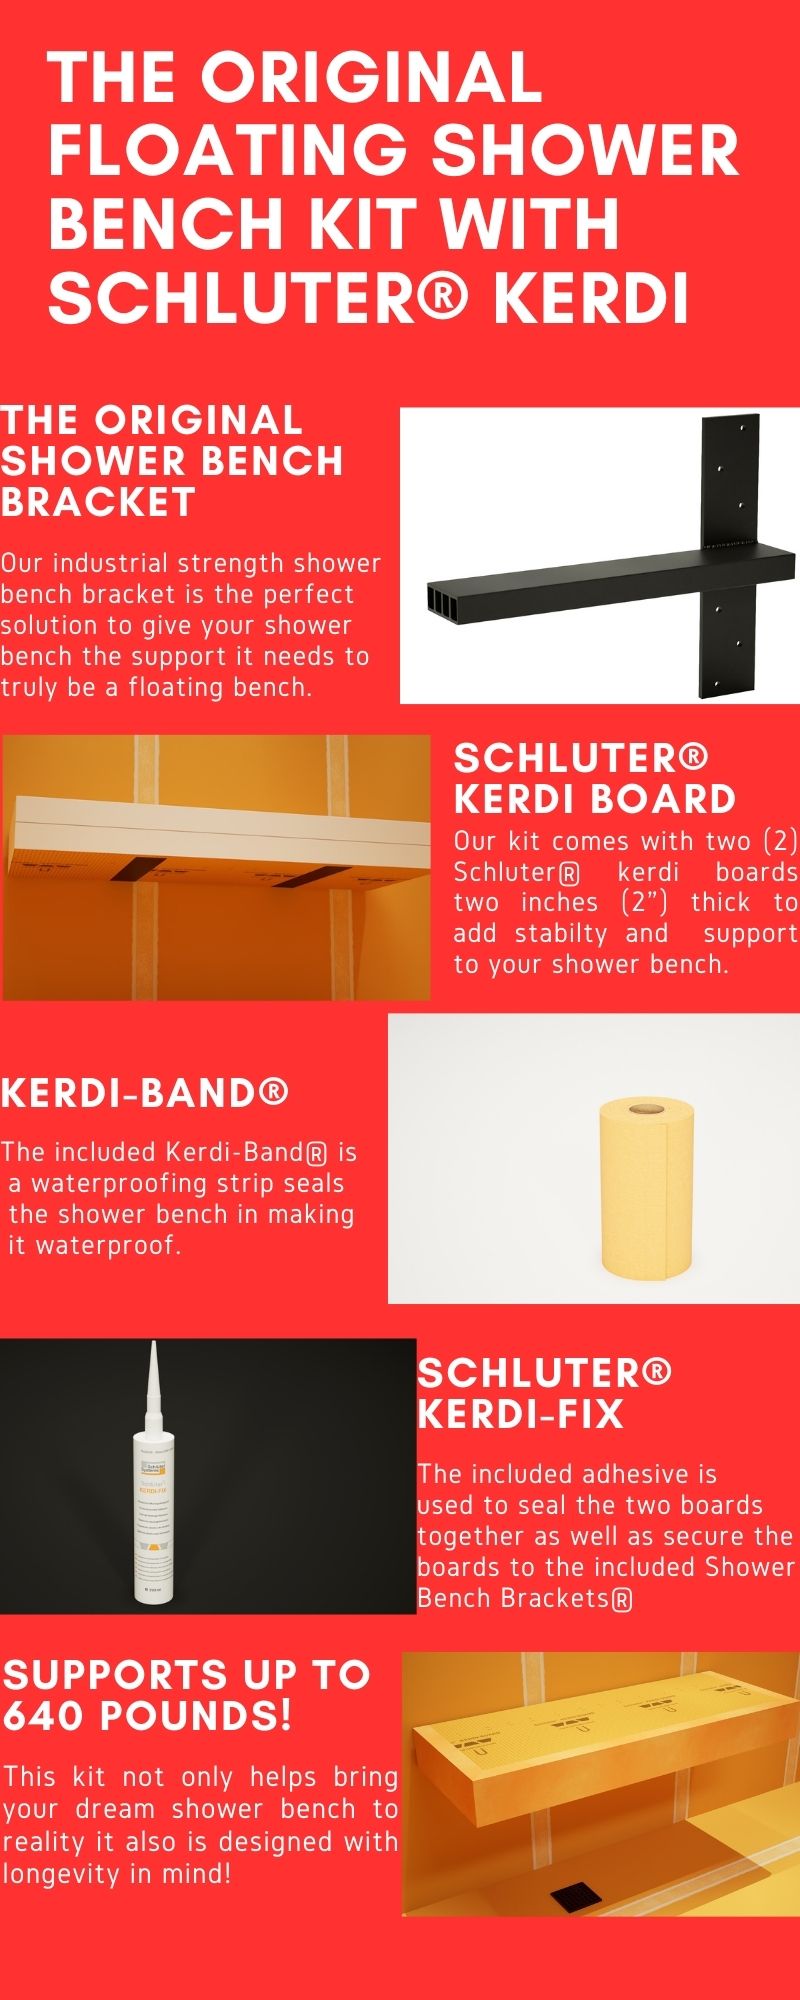 The Original Floating Shower Bench Kit with Schluter. 